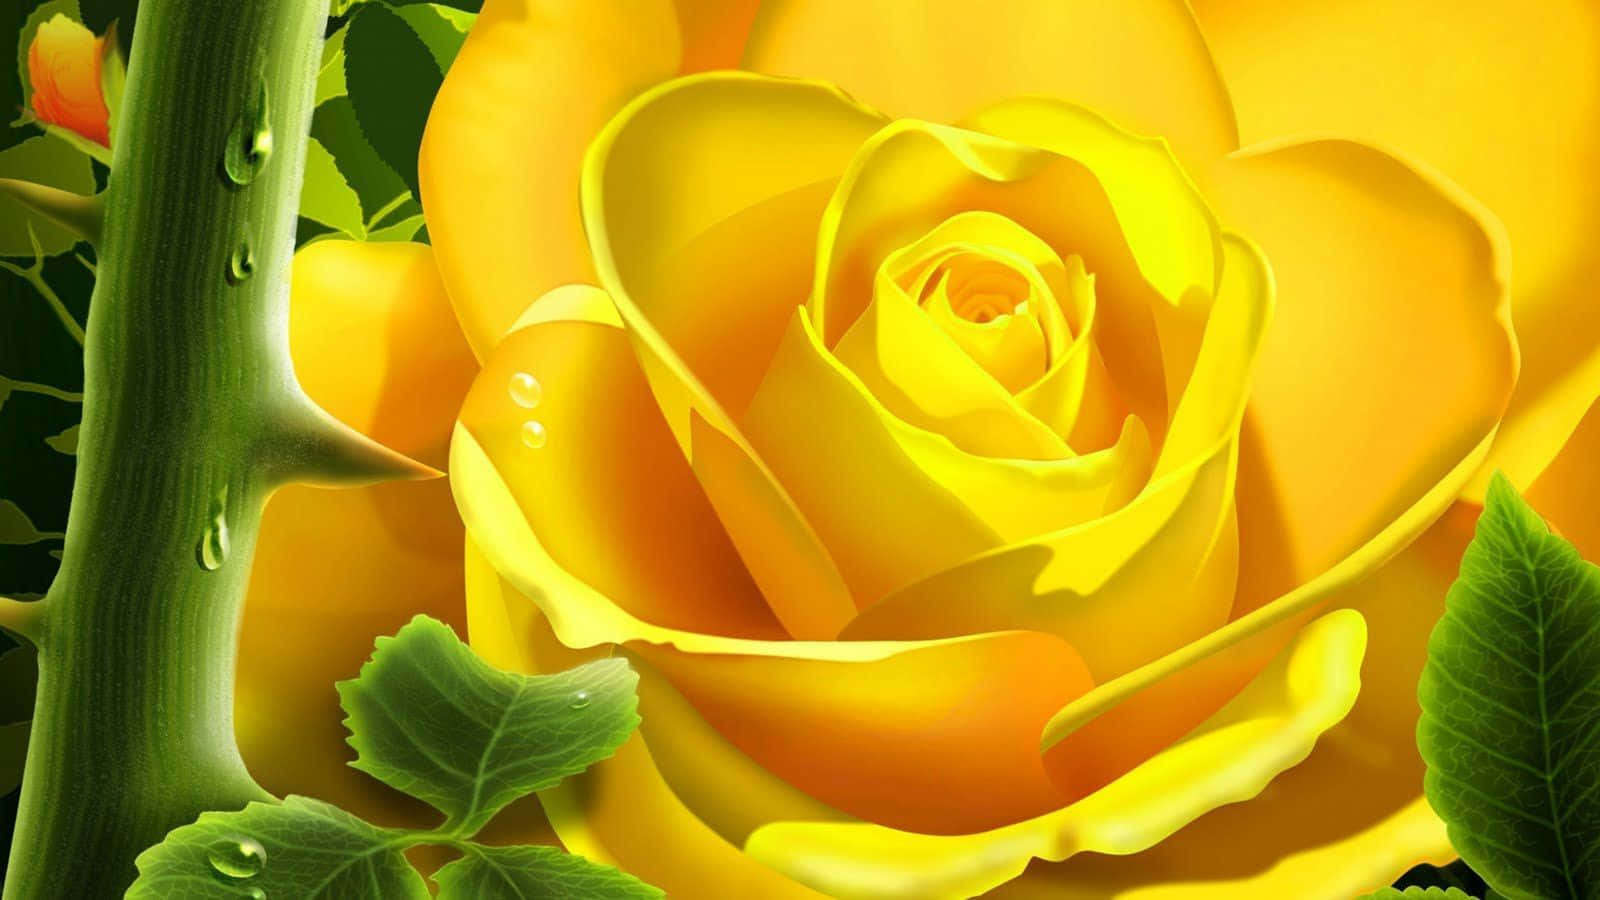 Sunlit Yellow Flower Blossoming On A Light Coloured Background